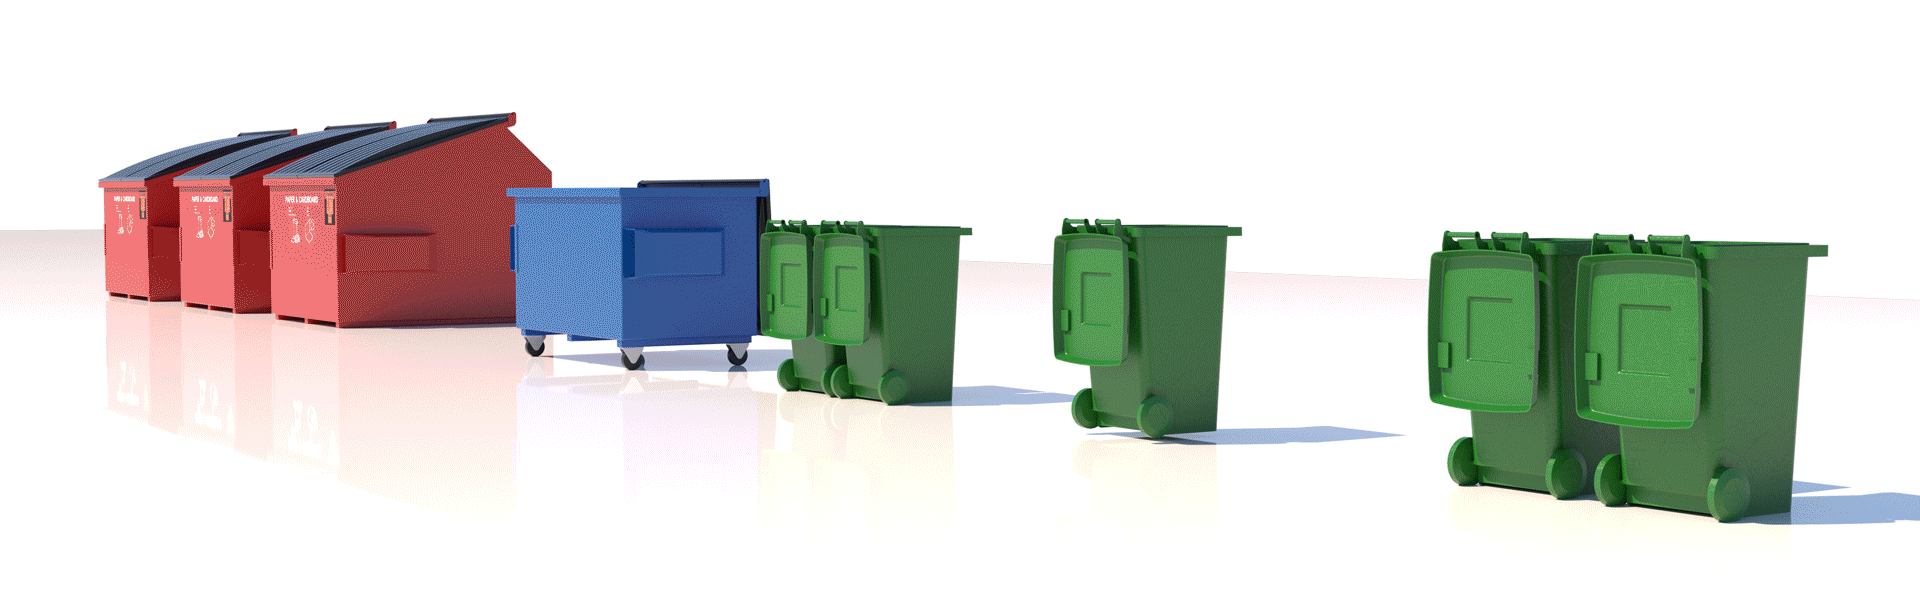 Recycling Container Housings, zero waste solution